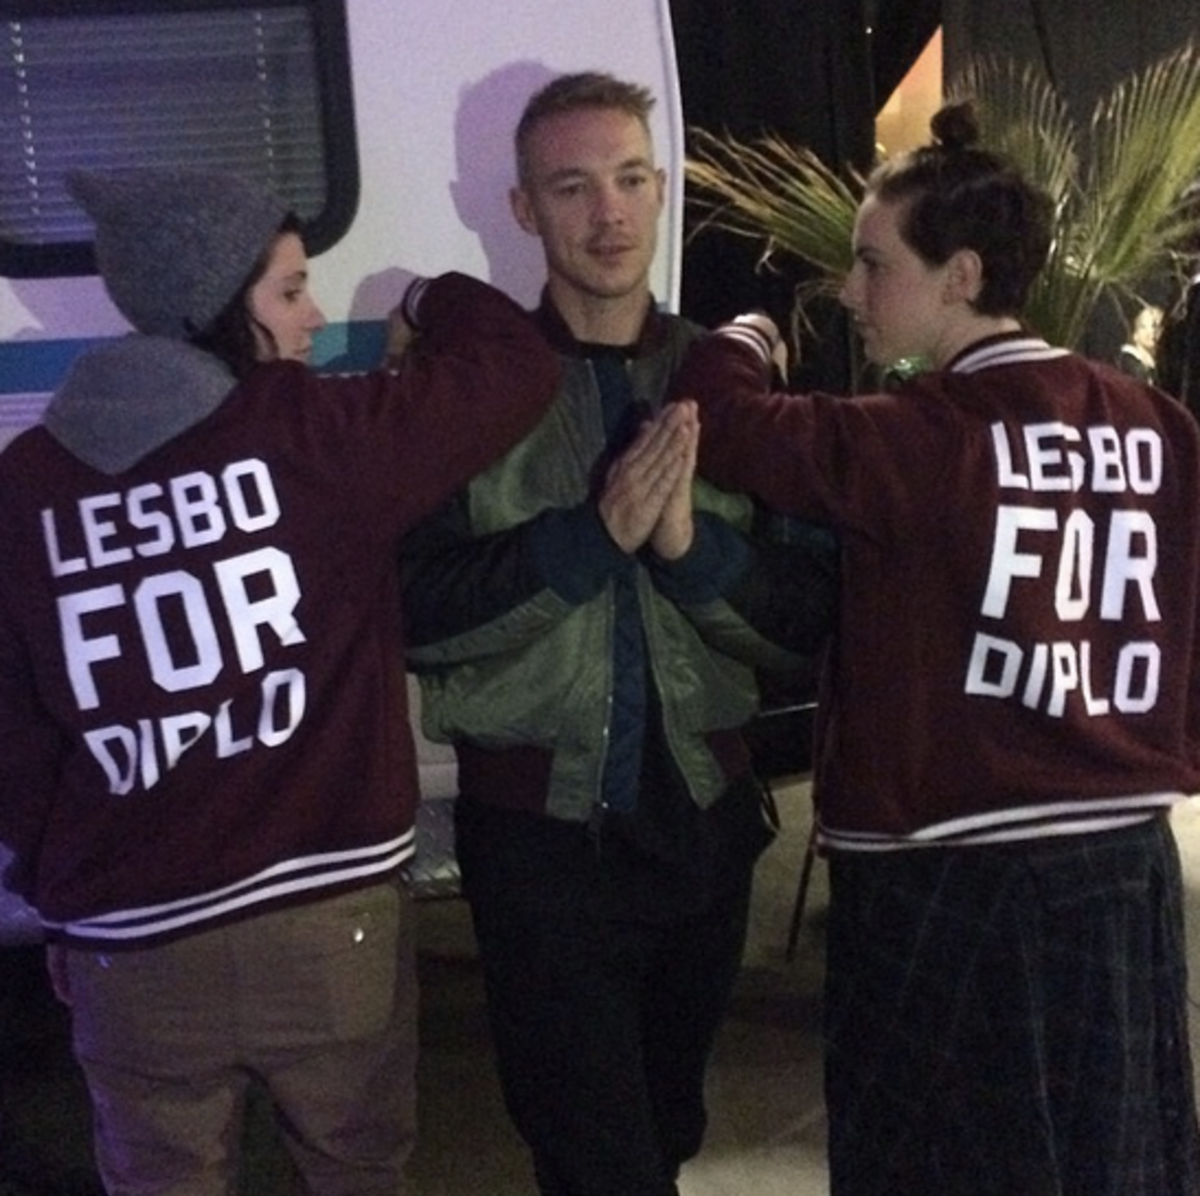 What Your Missing In Diplo & Taylor Swift Feud